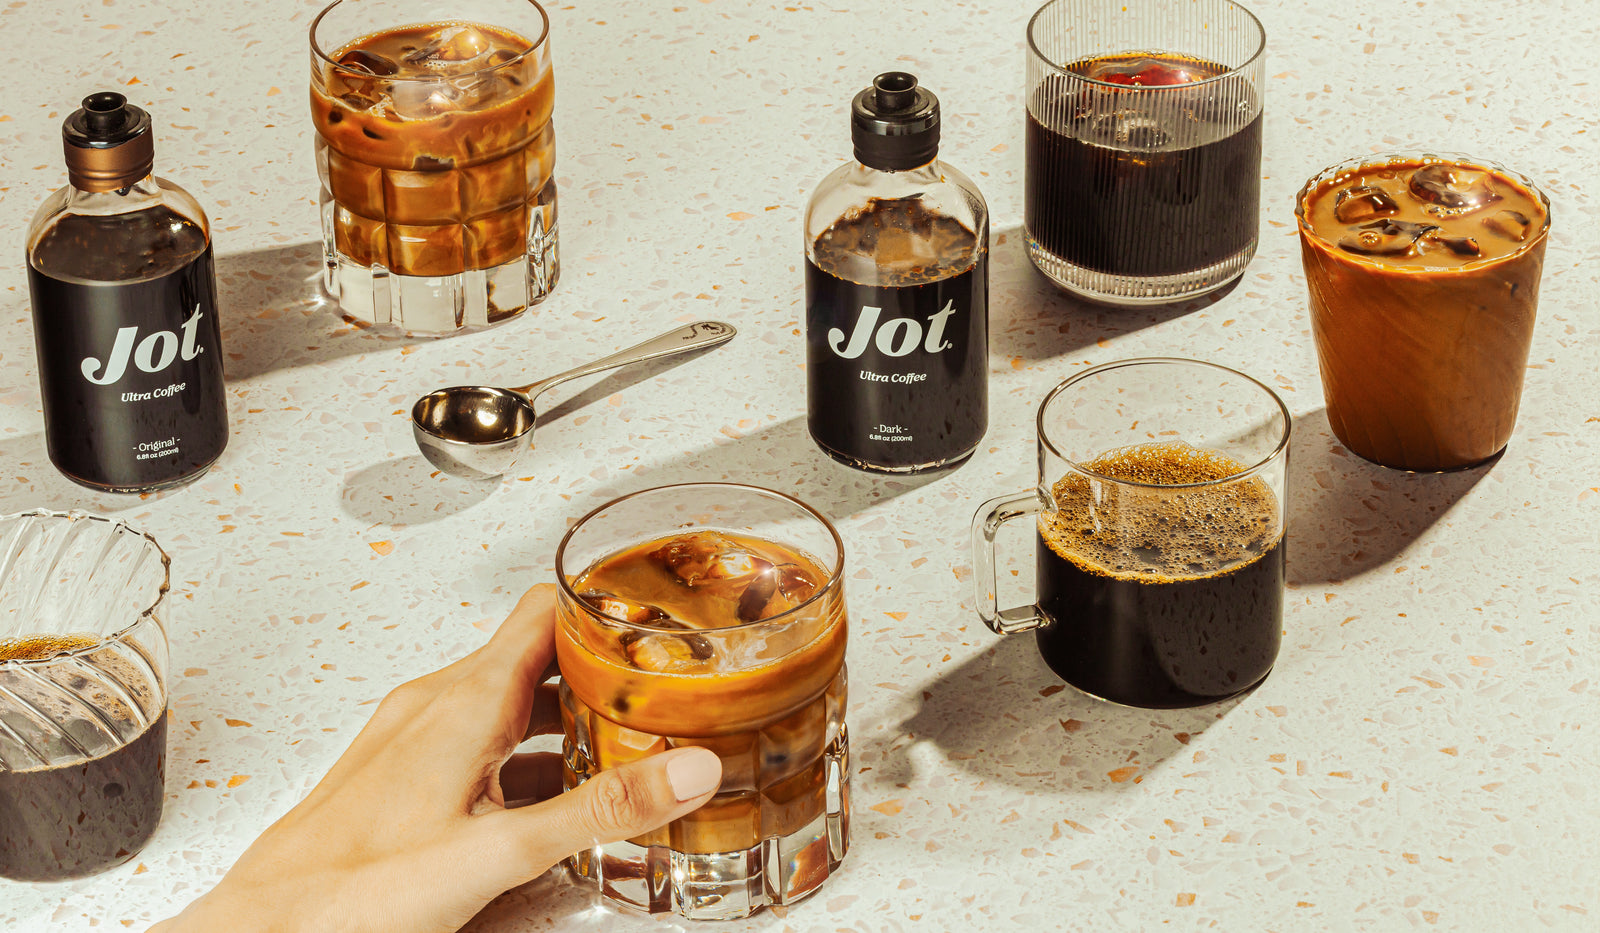 JOT Coffee Review: Always Keep A Bottle On Hand - Elevated Coffee Brew